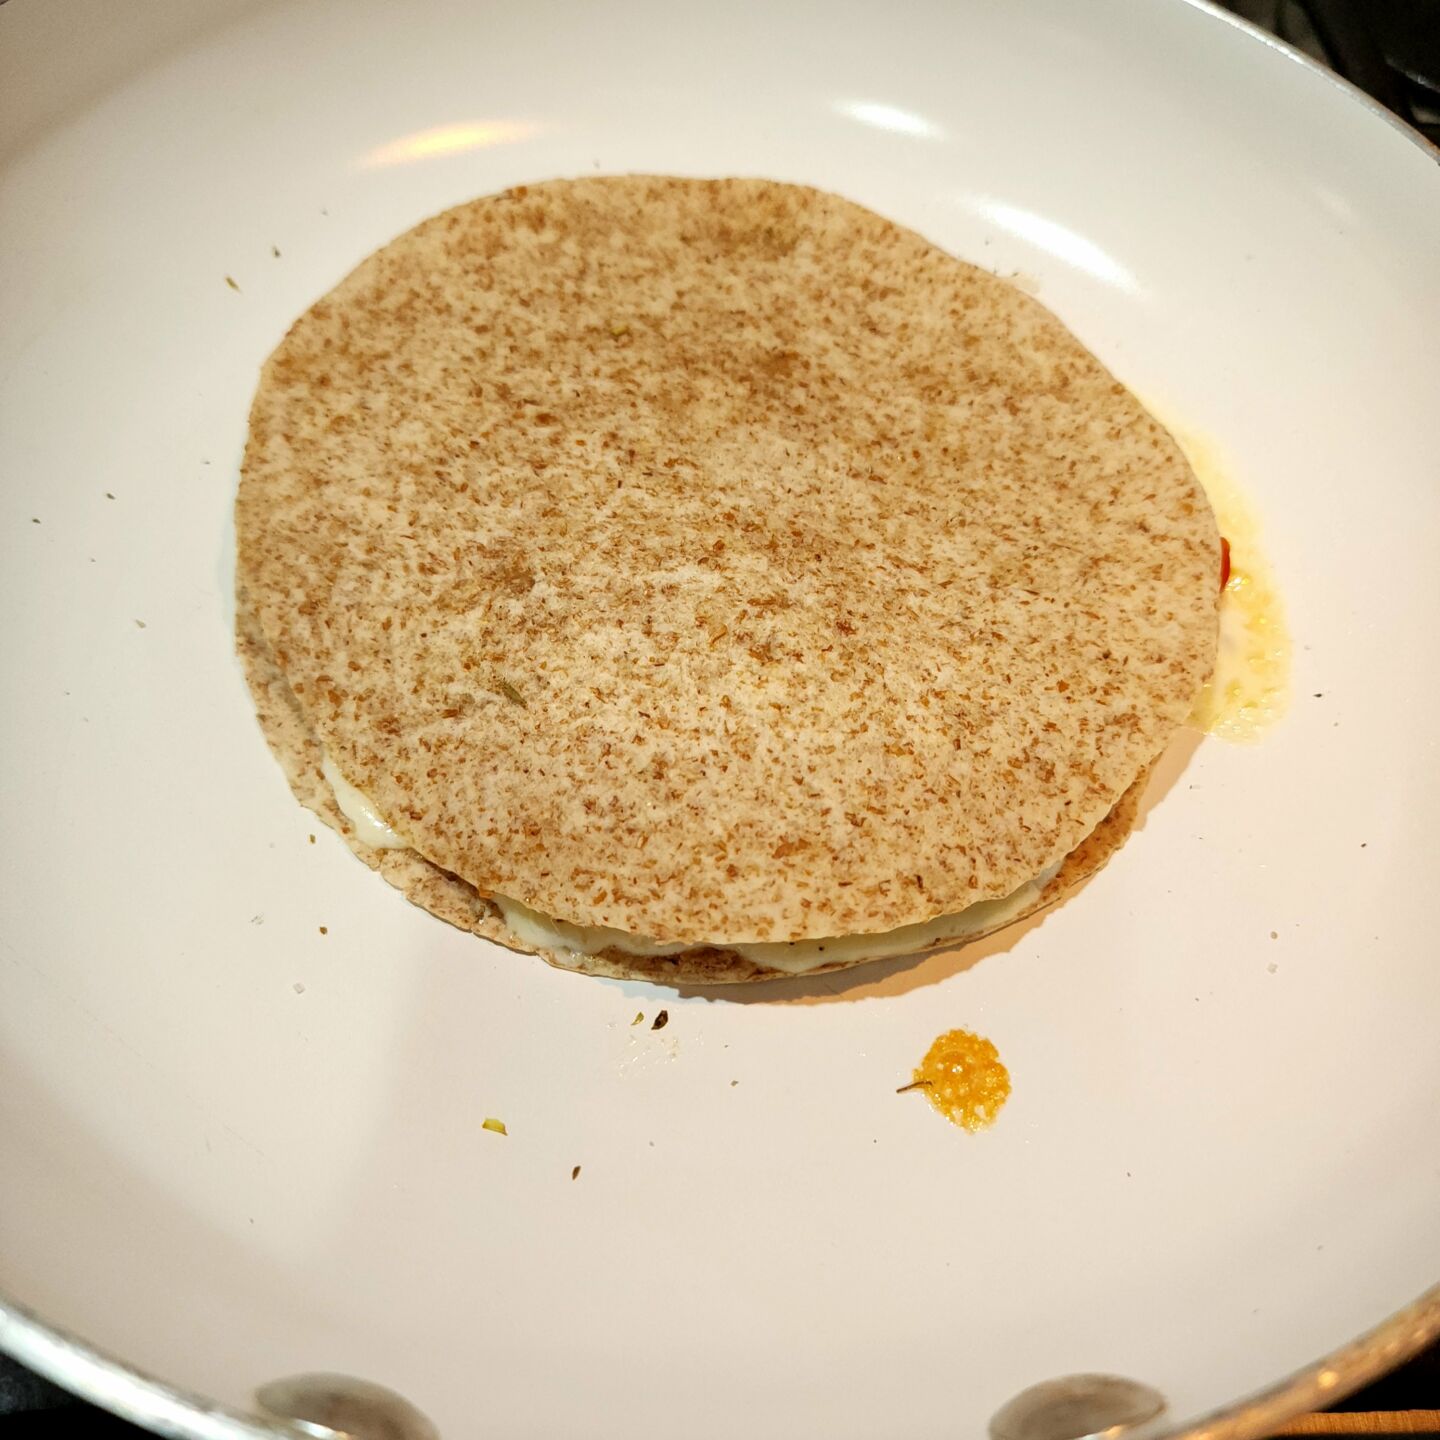 Place another tortilla on top and cook for 2 to 3 minutes before flipping